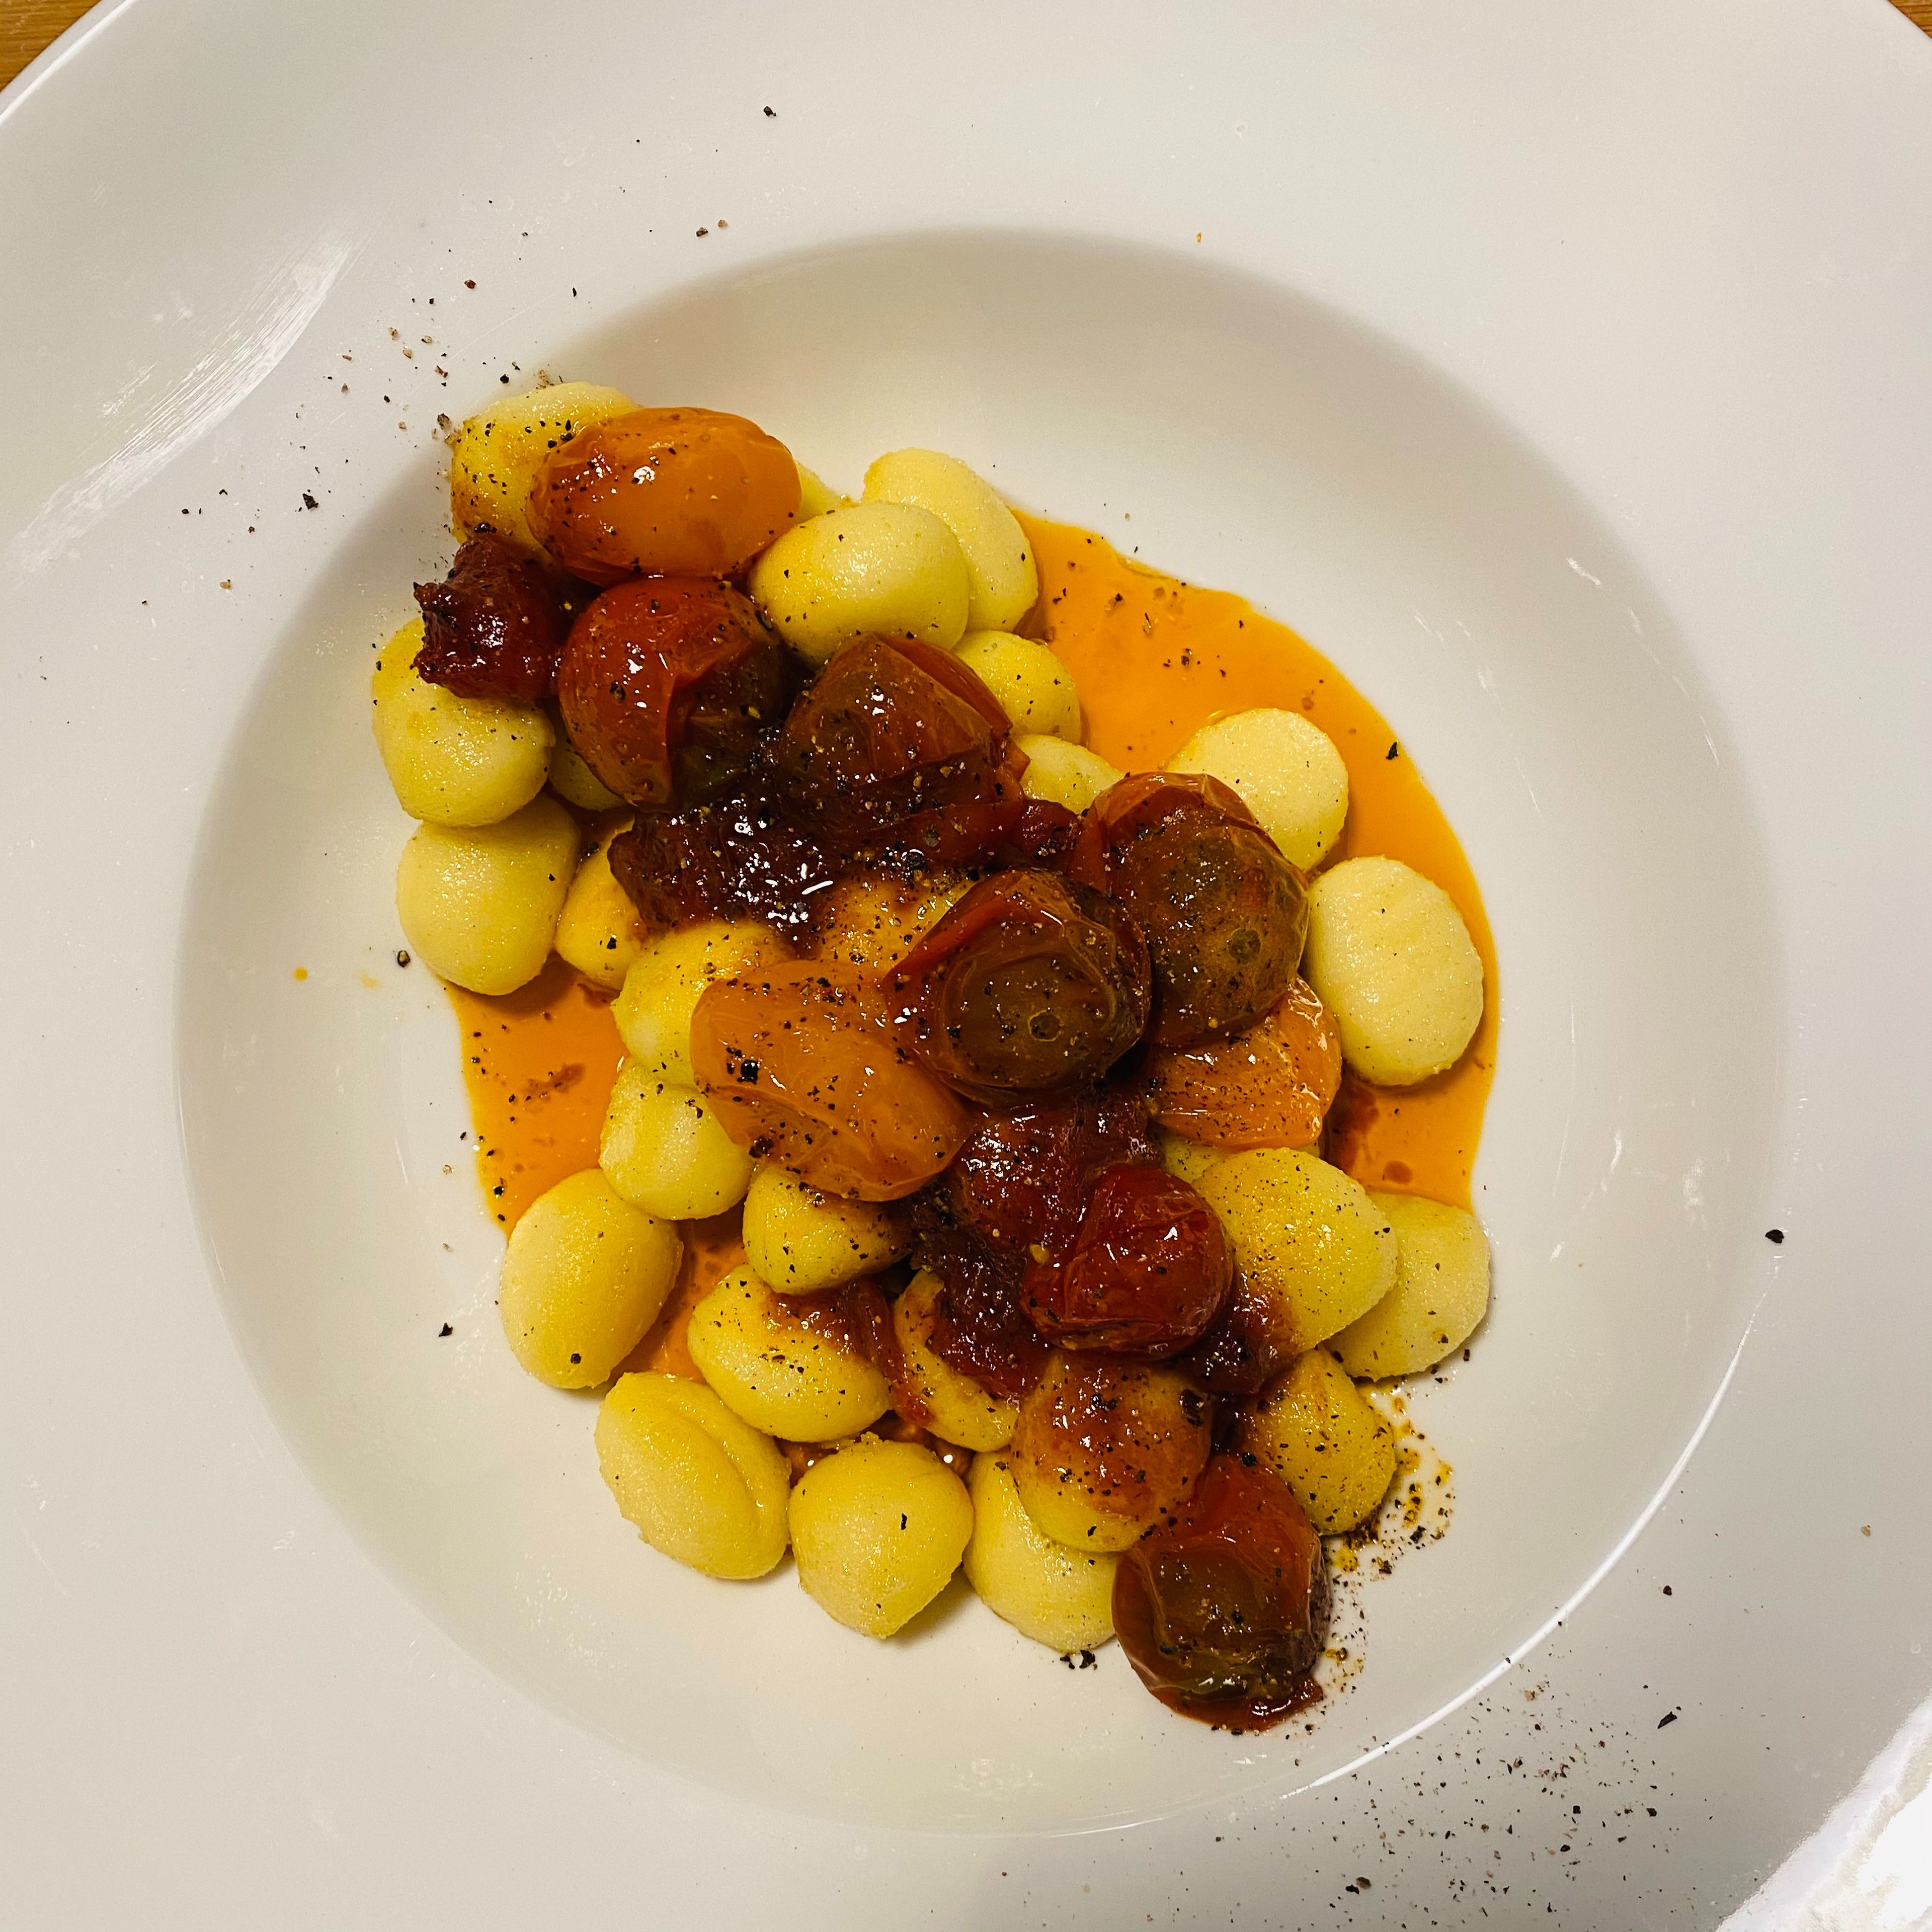 Place the gnocchi on a nice plate. Top with the roasted tomato-garlic mix. Spoon the aromatic sweet & spicy oil over the dish. Finish with a good grind of pepper, sprinkle with salt, and serve.